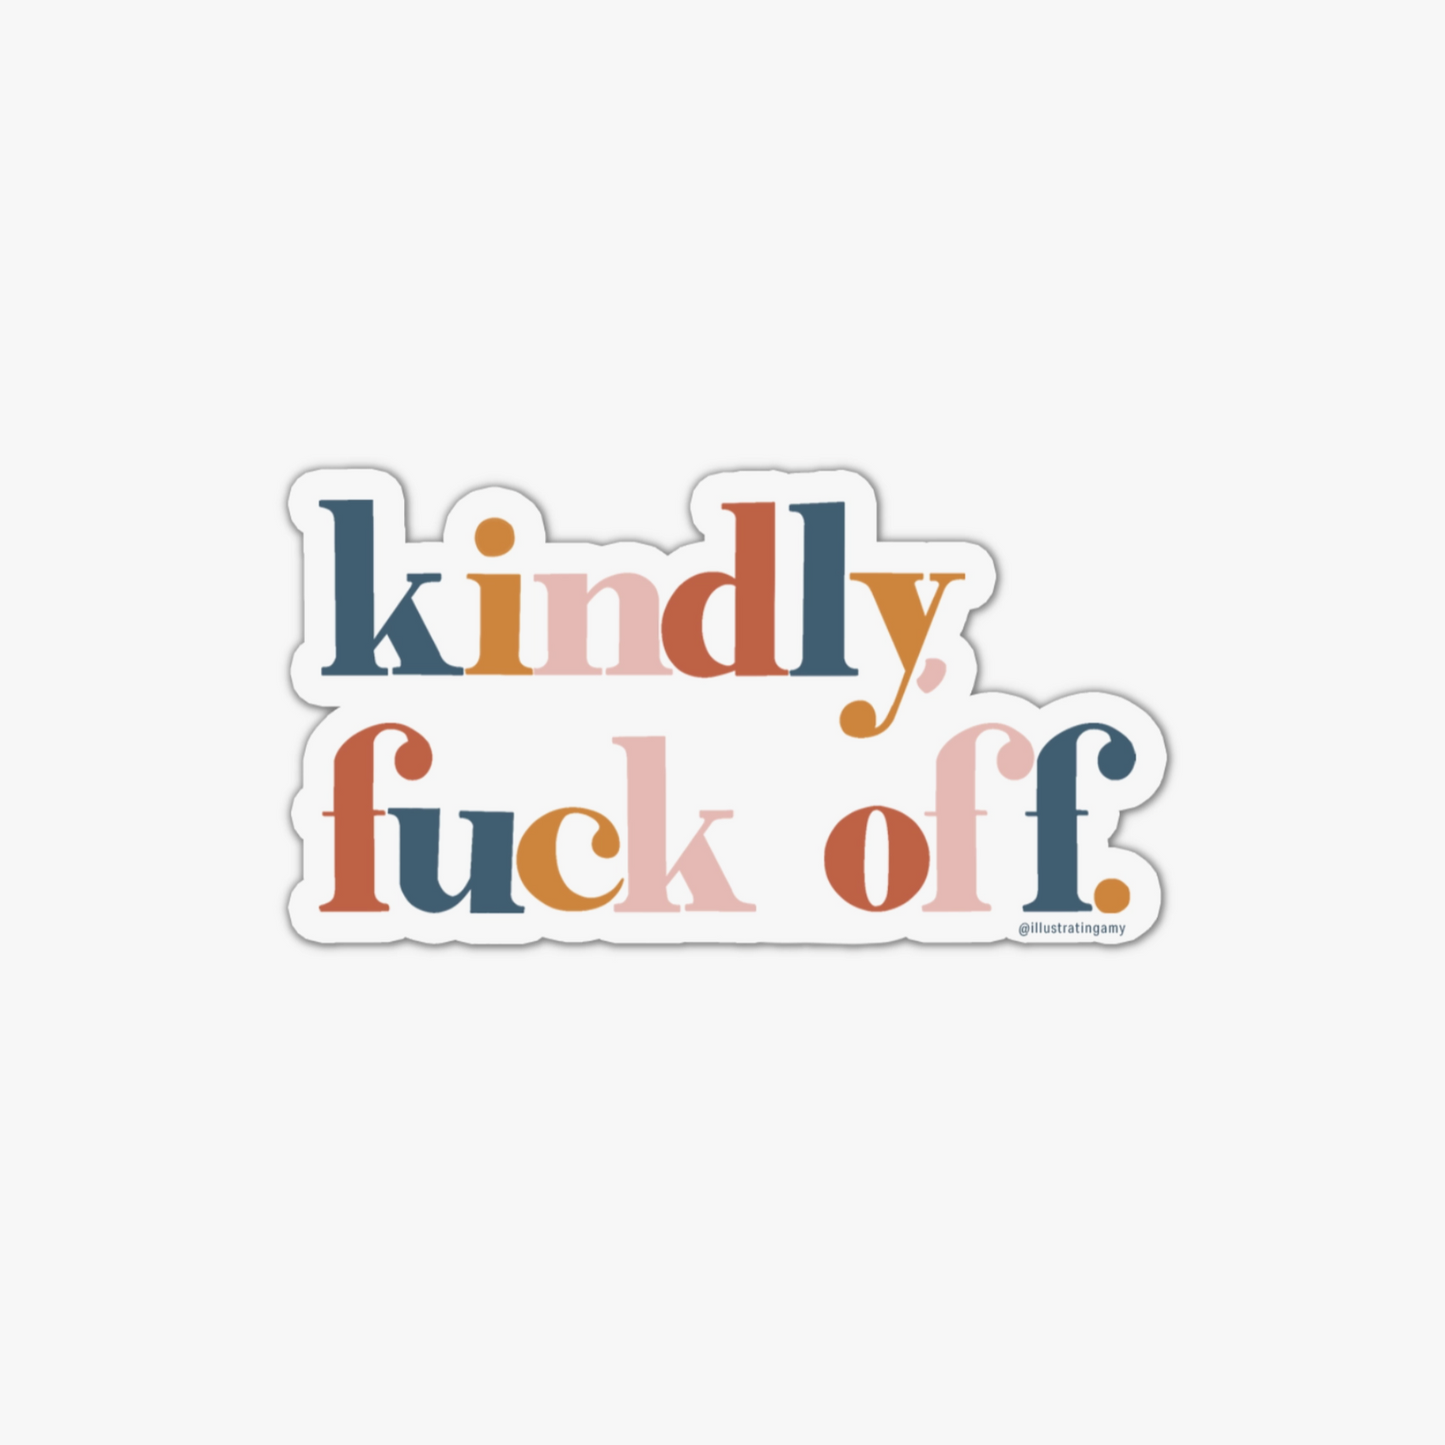 Kindly Fuck Off Sticker